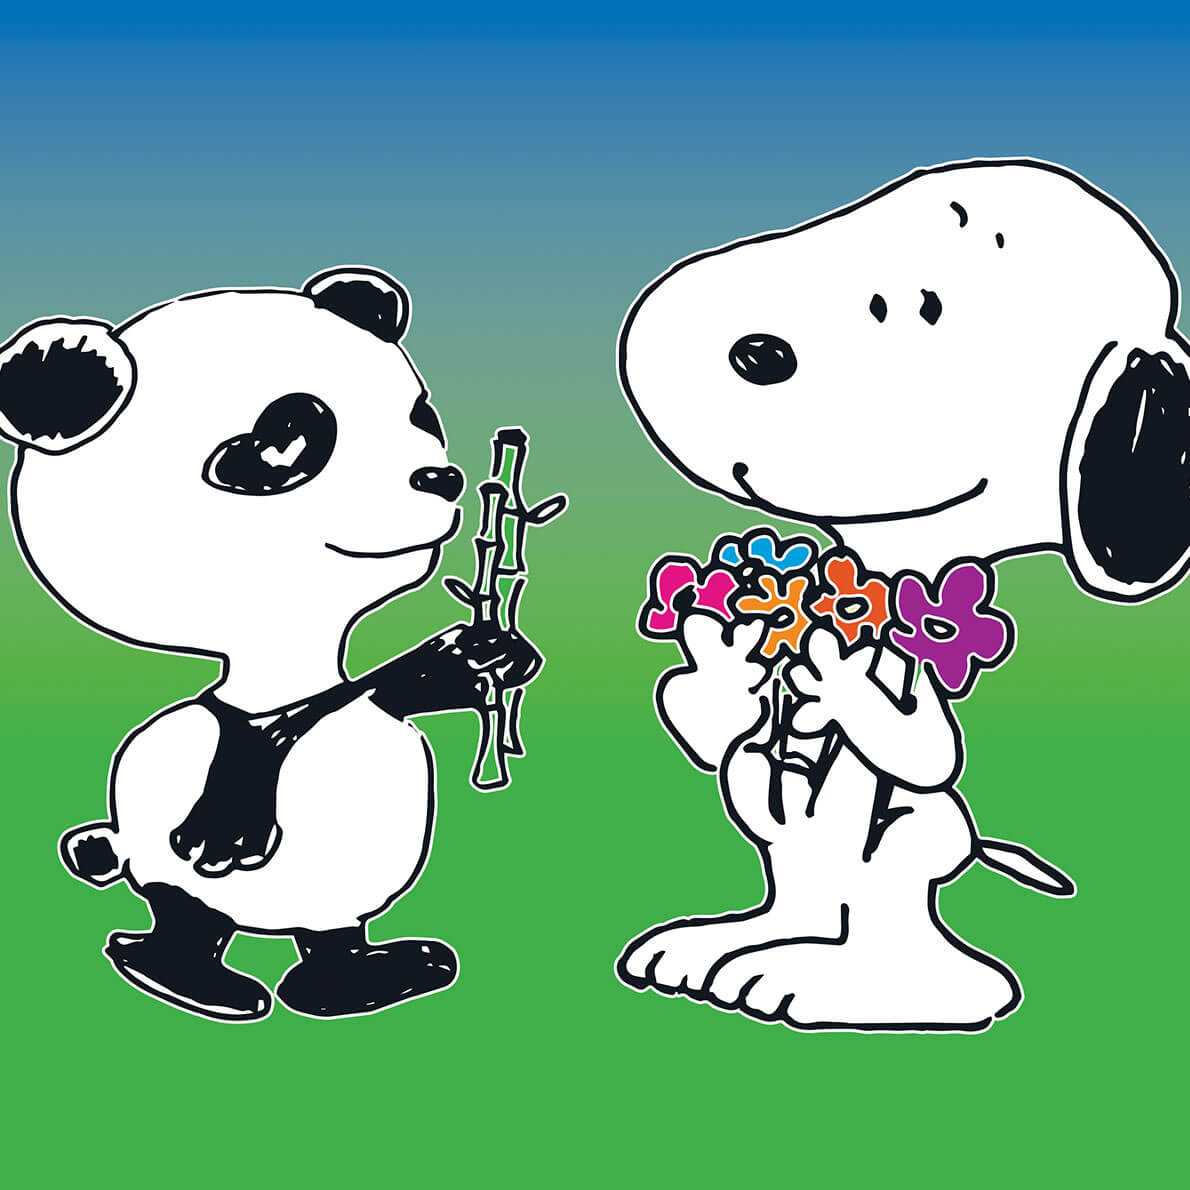 A panda and a black and white dog in front of a blue and green background.